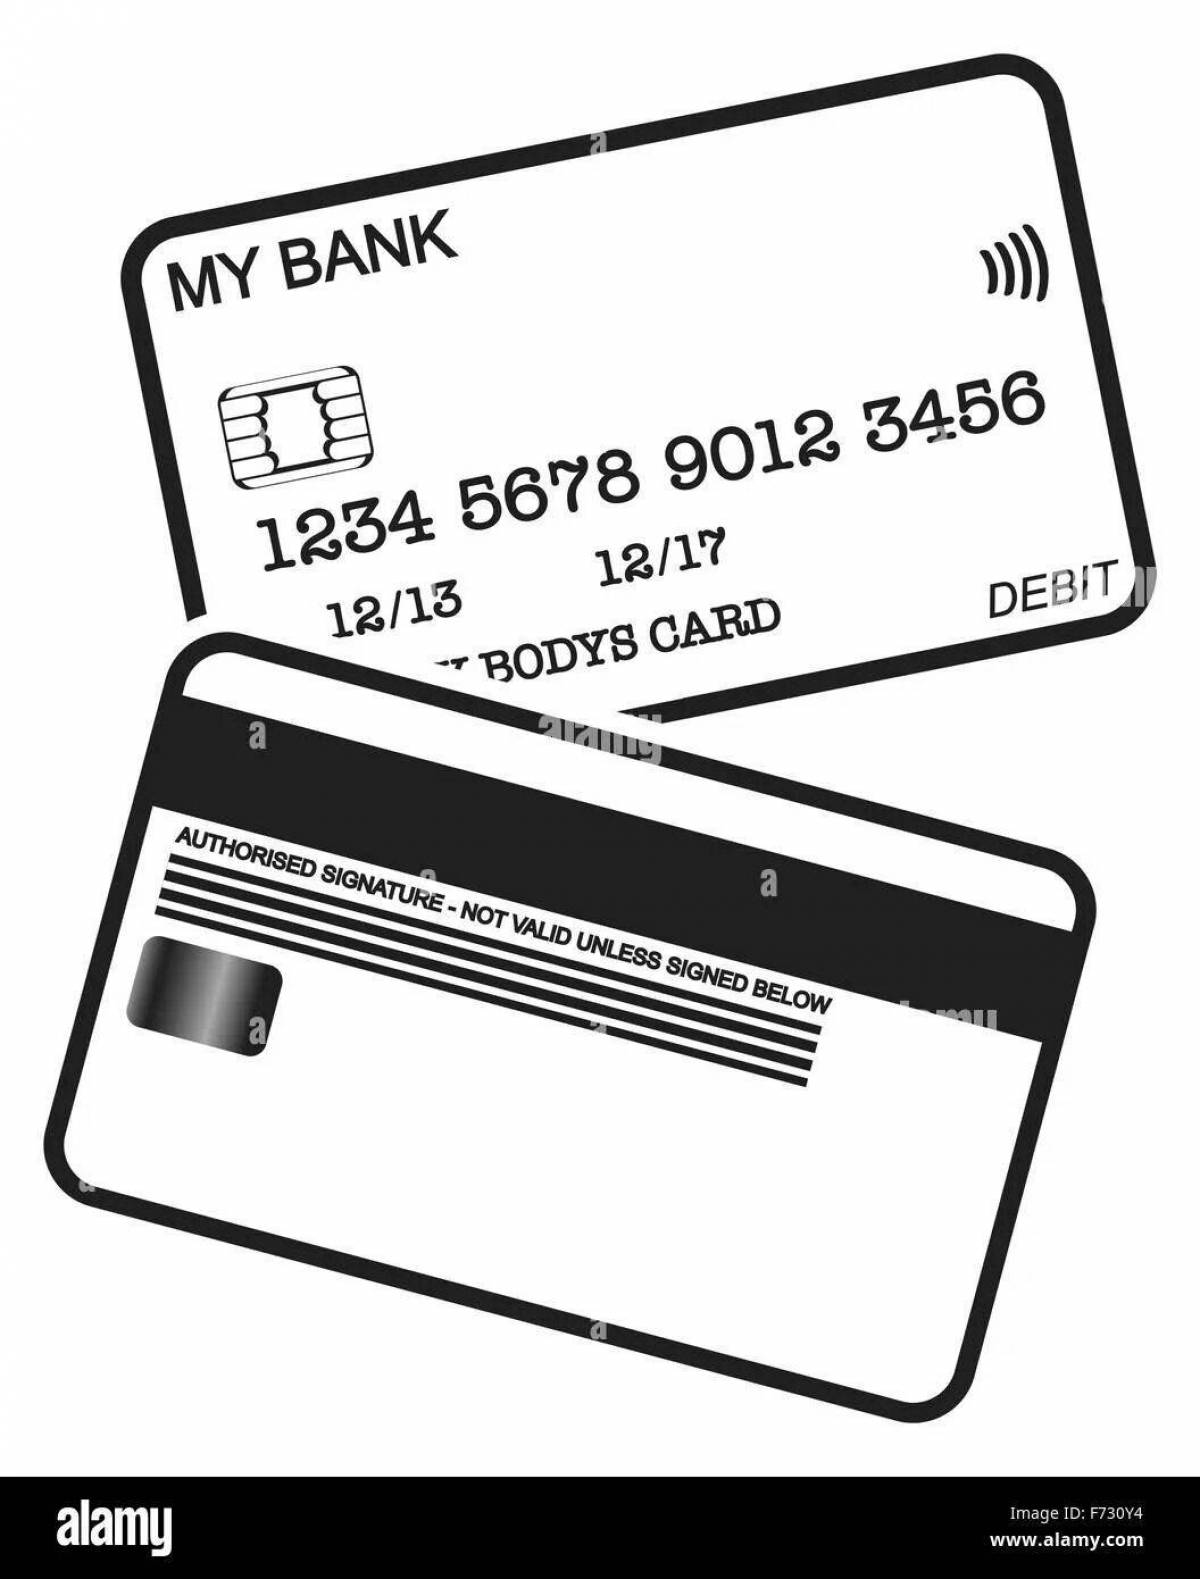 Playful bank card coloring page